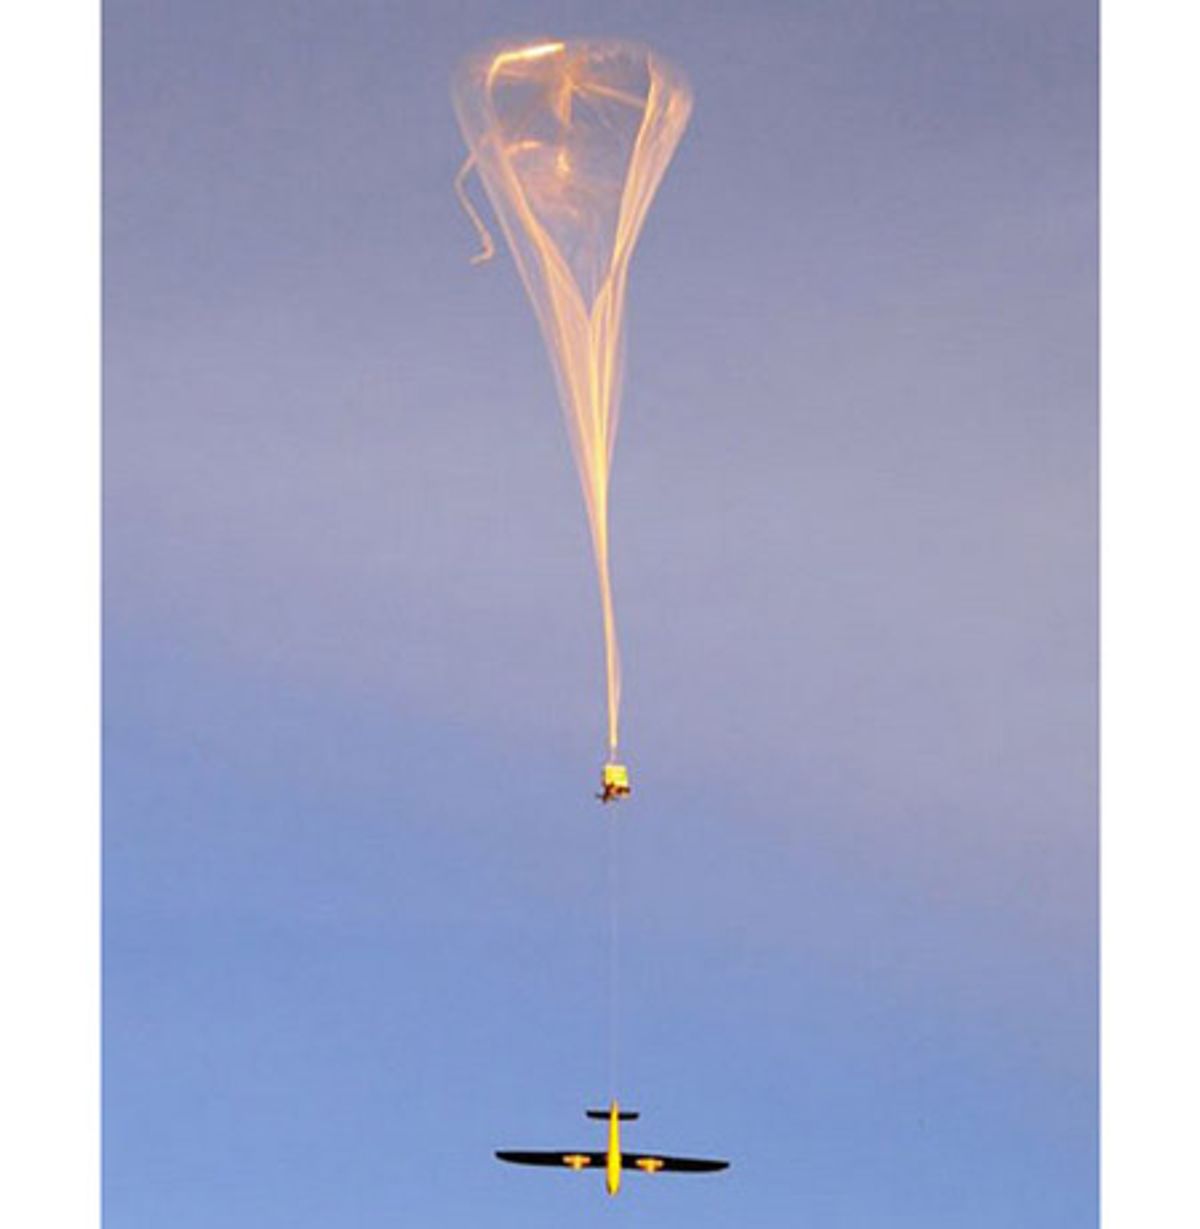 U.S. Navy Starts Delivering Drones Using Balloons and Submarines